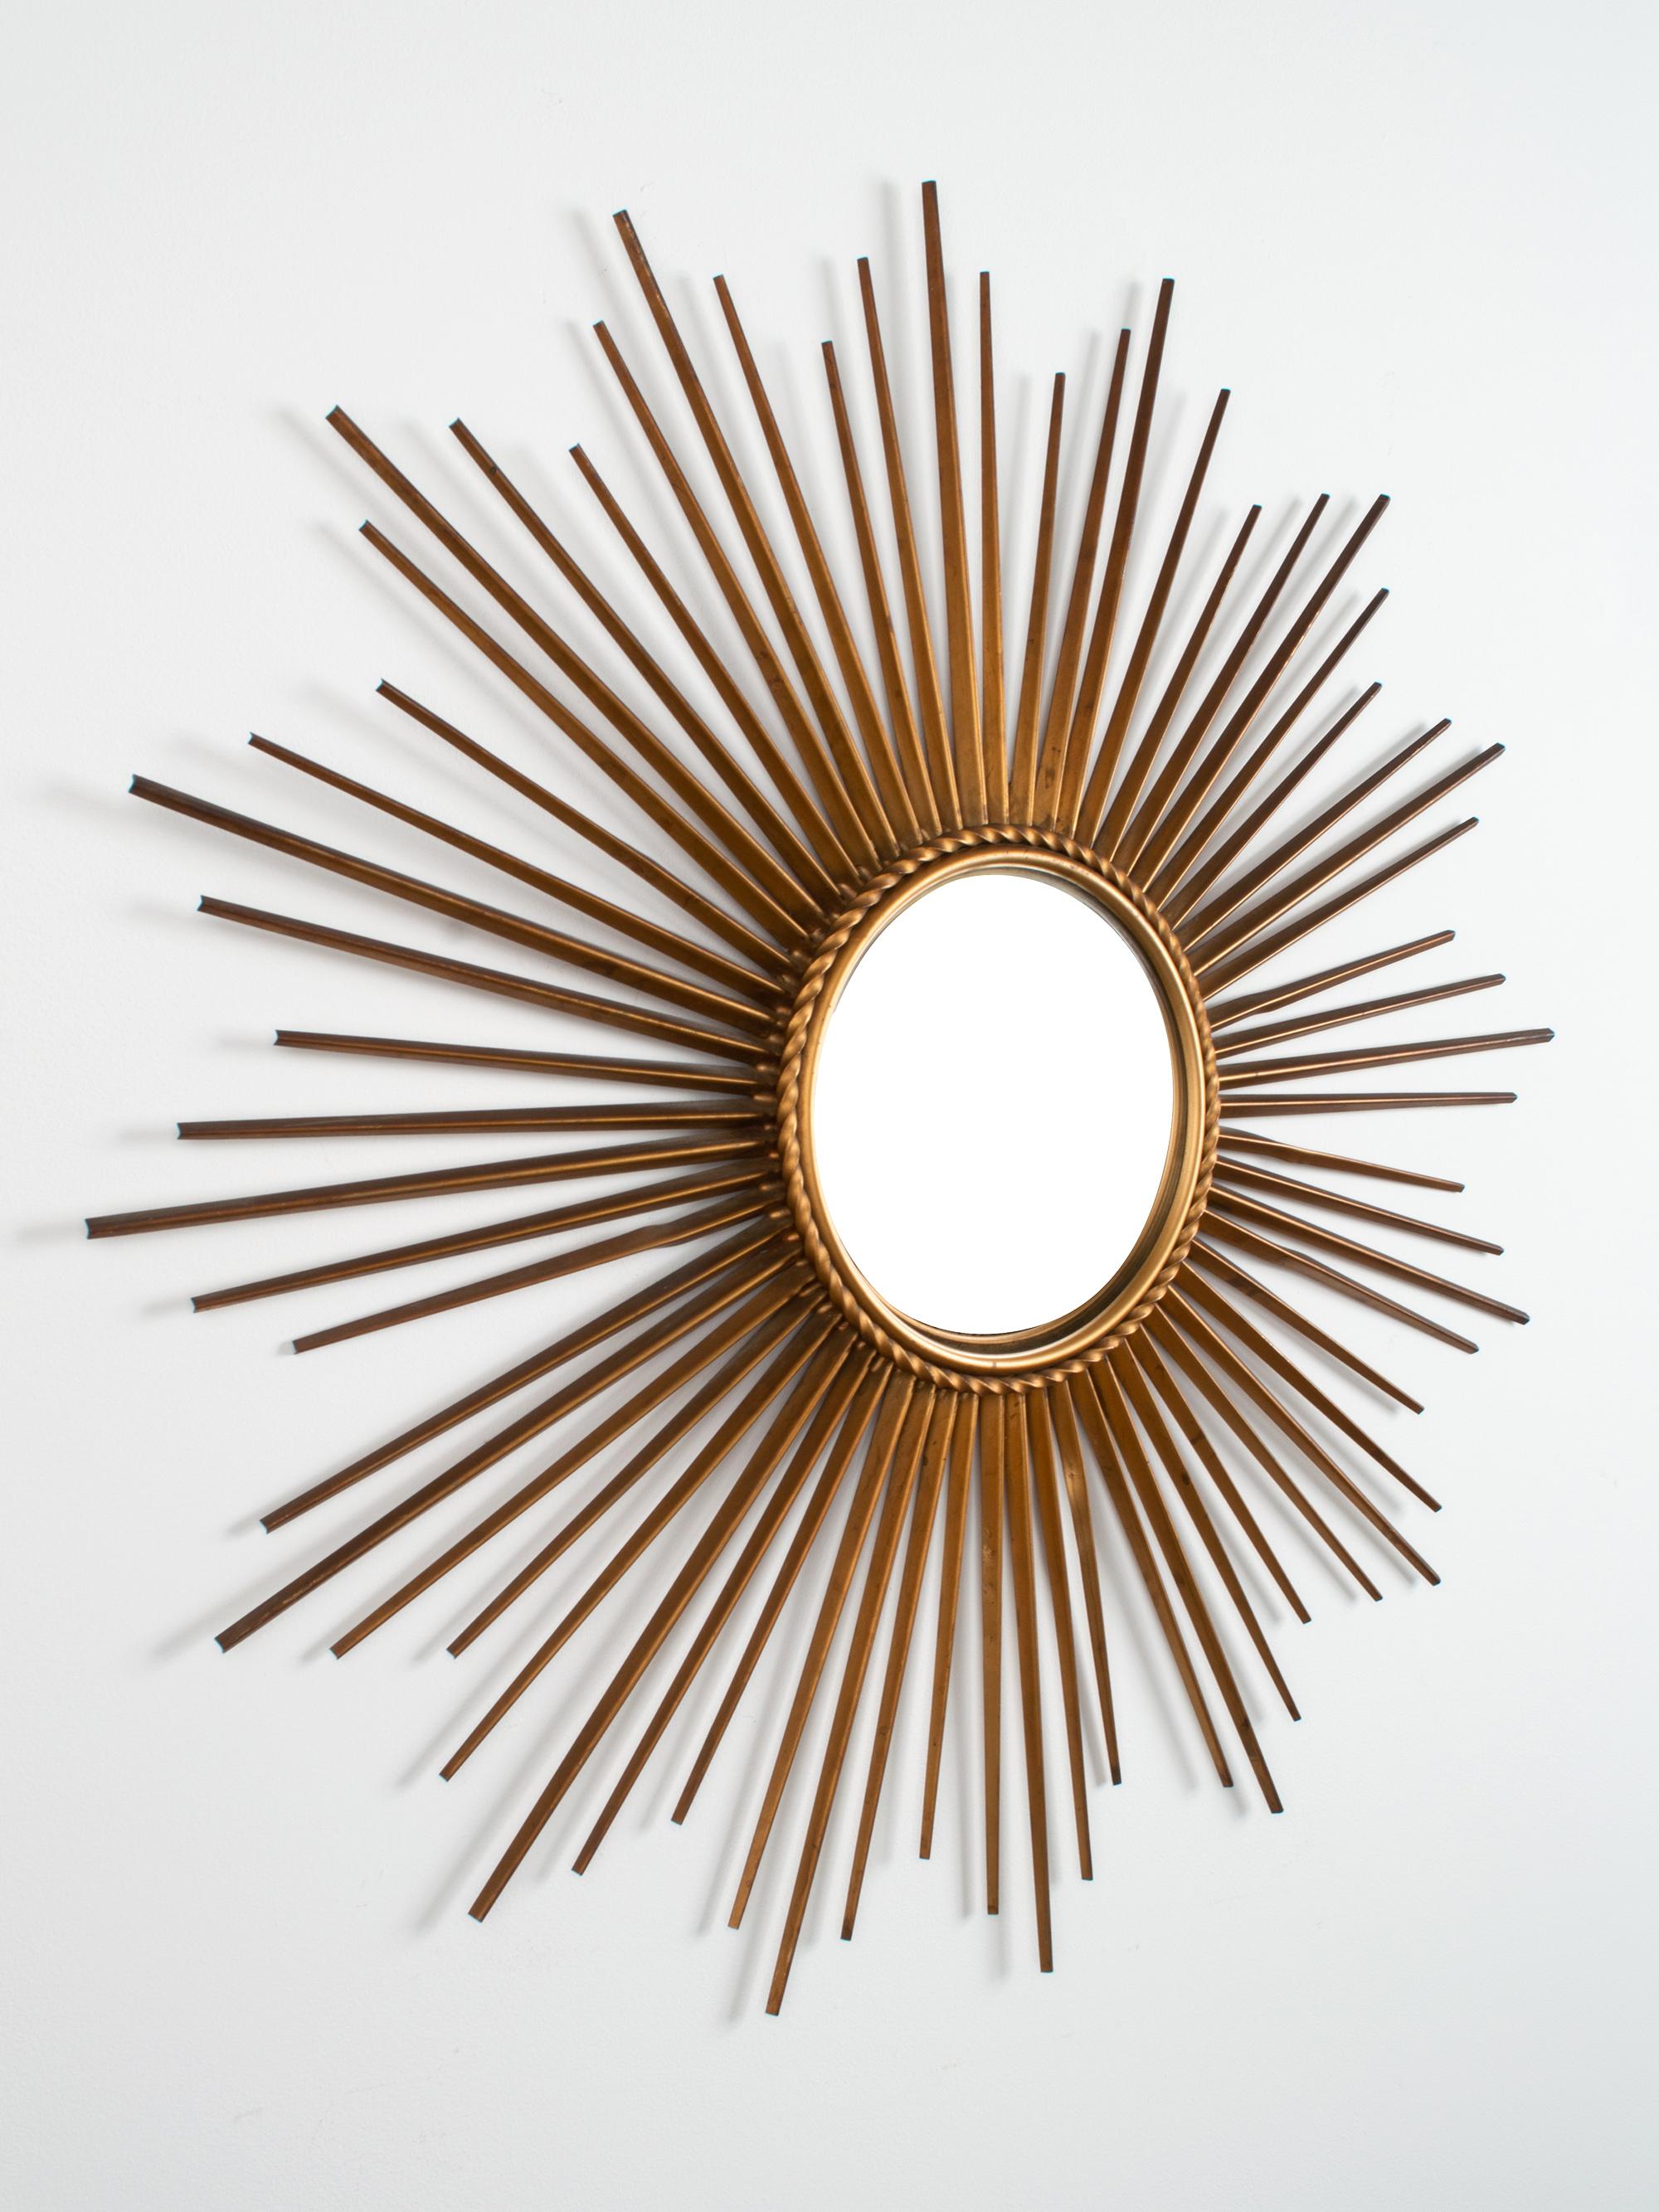 Large bronze metal sunburst mirror by Chaty Vallarius, France, circa 1950.
Very good condition consistent with age. Slight twists to three stems.